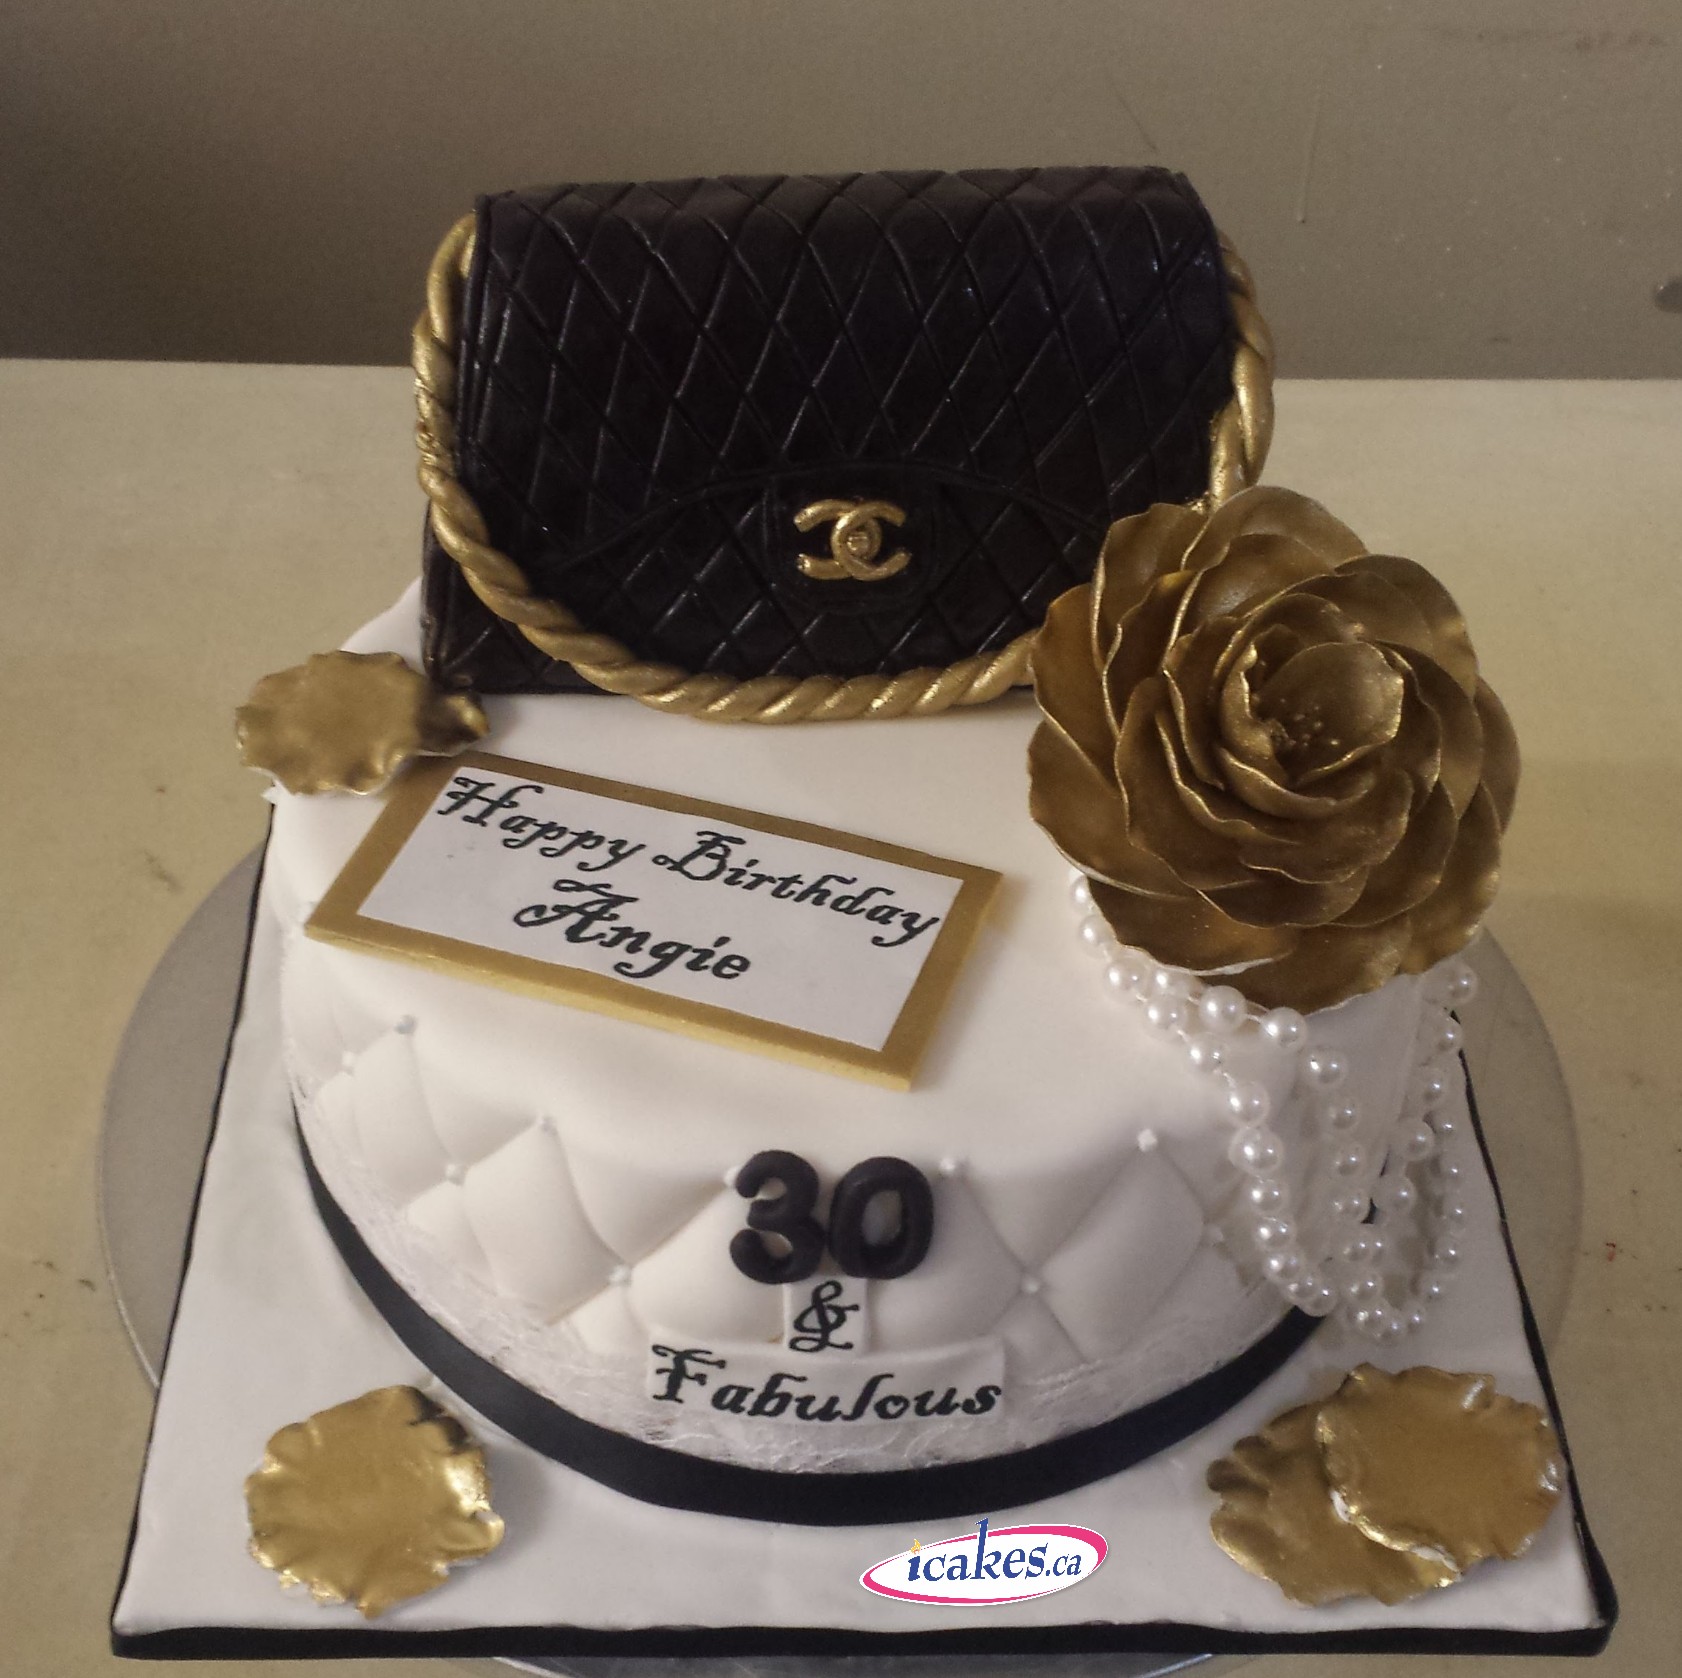 Chanel, Louis Vuitton, Gucci, Prada Bag/Purse, Black And Gold Rose, Birthday Cake For Woman/Girl